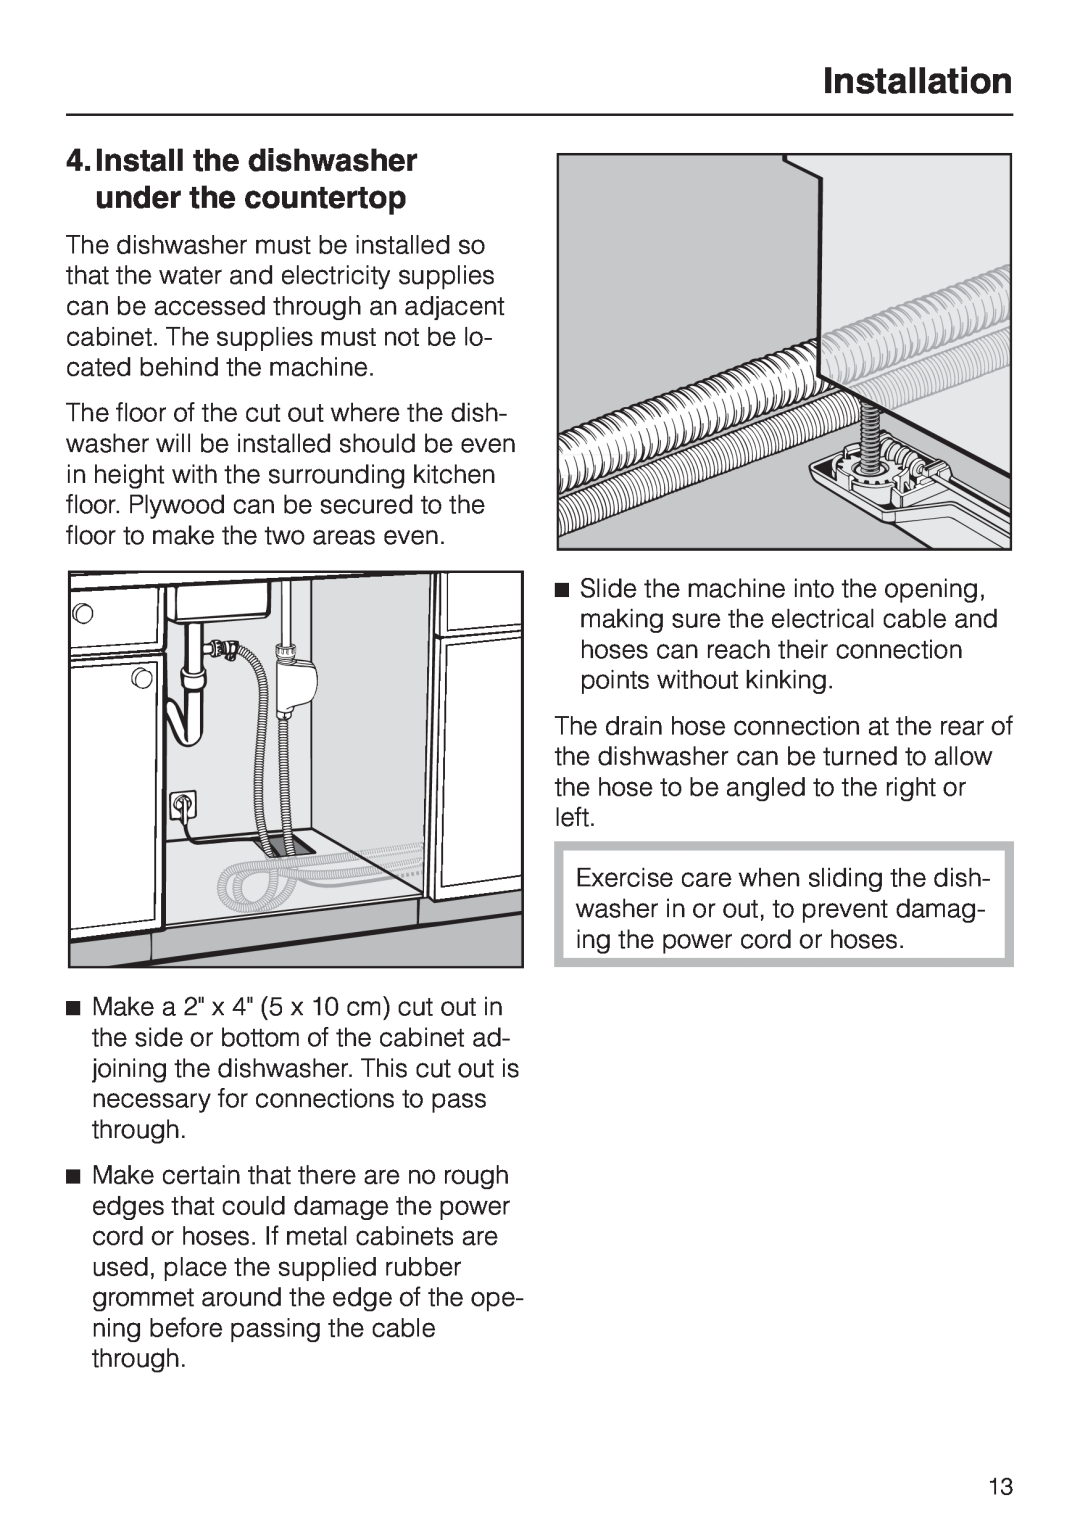 Miele HG02 installation instructions Install the dishwasher under the countertop, Installation 